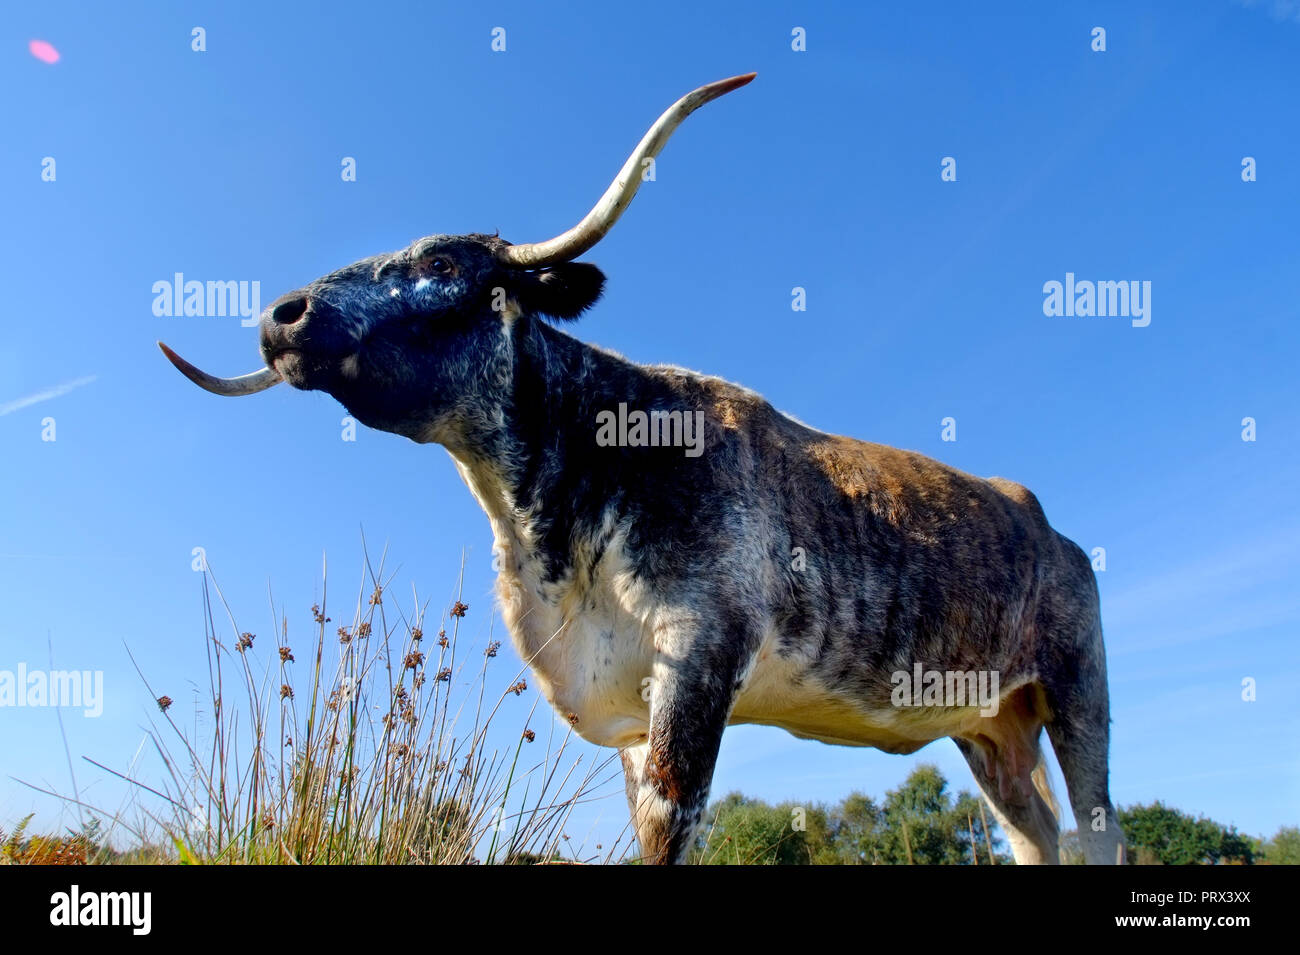 Chailey, East Sussex, 5th October 2018. English longhorn cattle grazing on Chailey Common, nature reserve, East Sussex. The cattle have been brought in especially to control trees and shurbs that are threatening the grazing areas of the comon. ©Peter Cripps/Alamy Live News Stock Photo